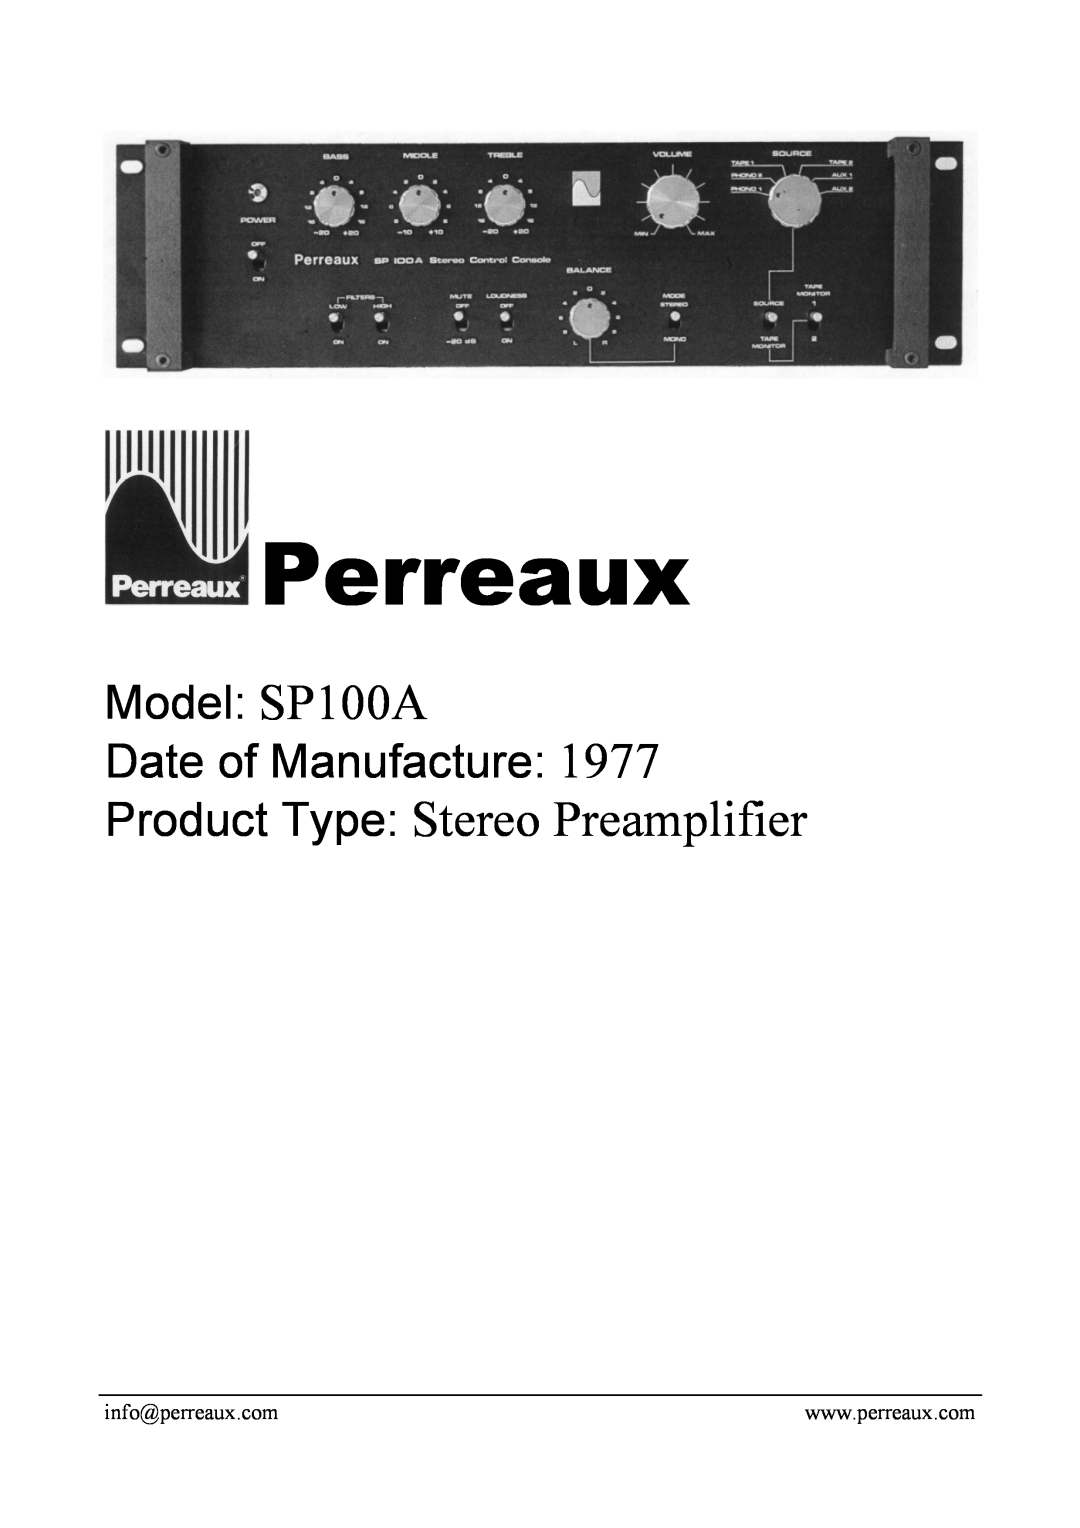 Perreaux manual Perreaux, Product Type Stereo Preamplifier, Model SP100A Date of Manufacture 